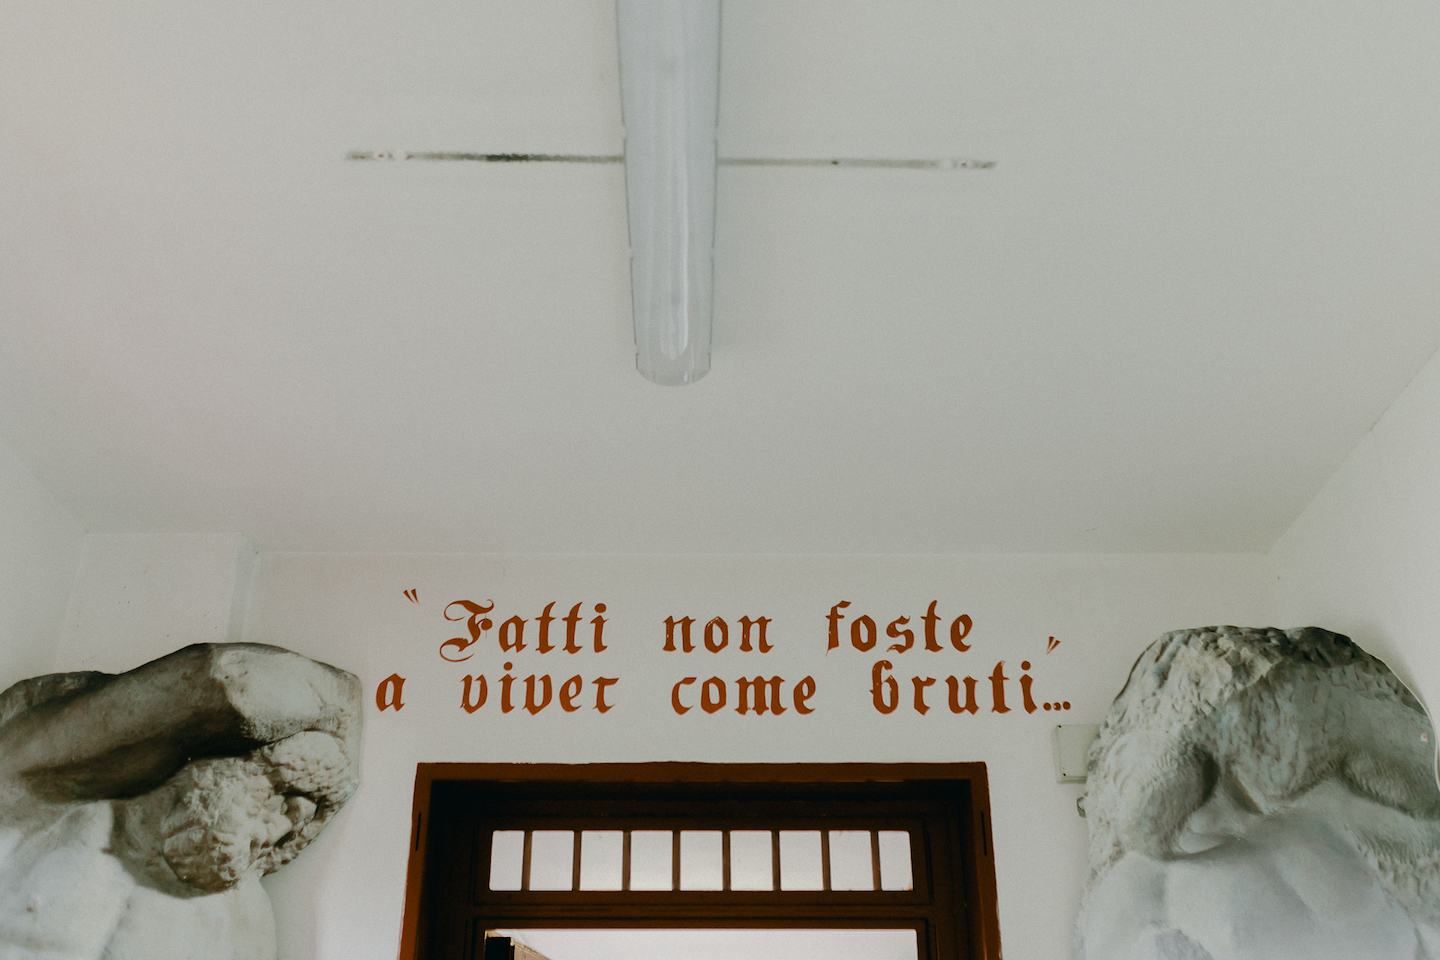 Giotto Bakery – A gothic red font spelling the famous Dante quote. The writing is on top of a red gate, which has decals of marble statues on either side.